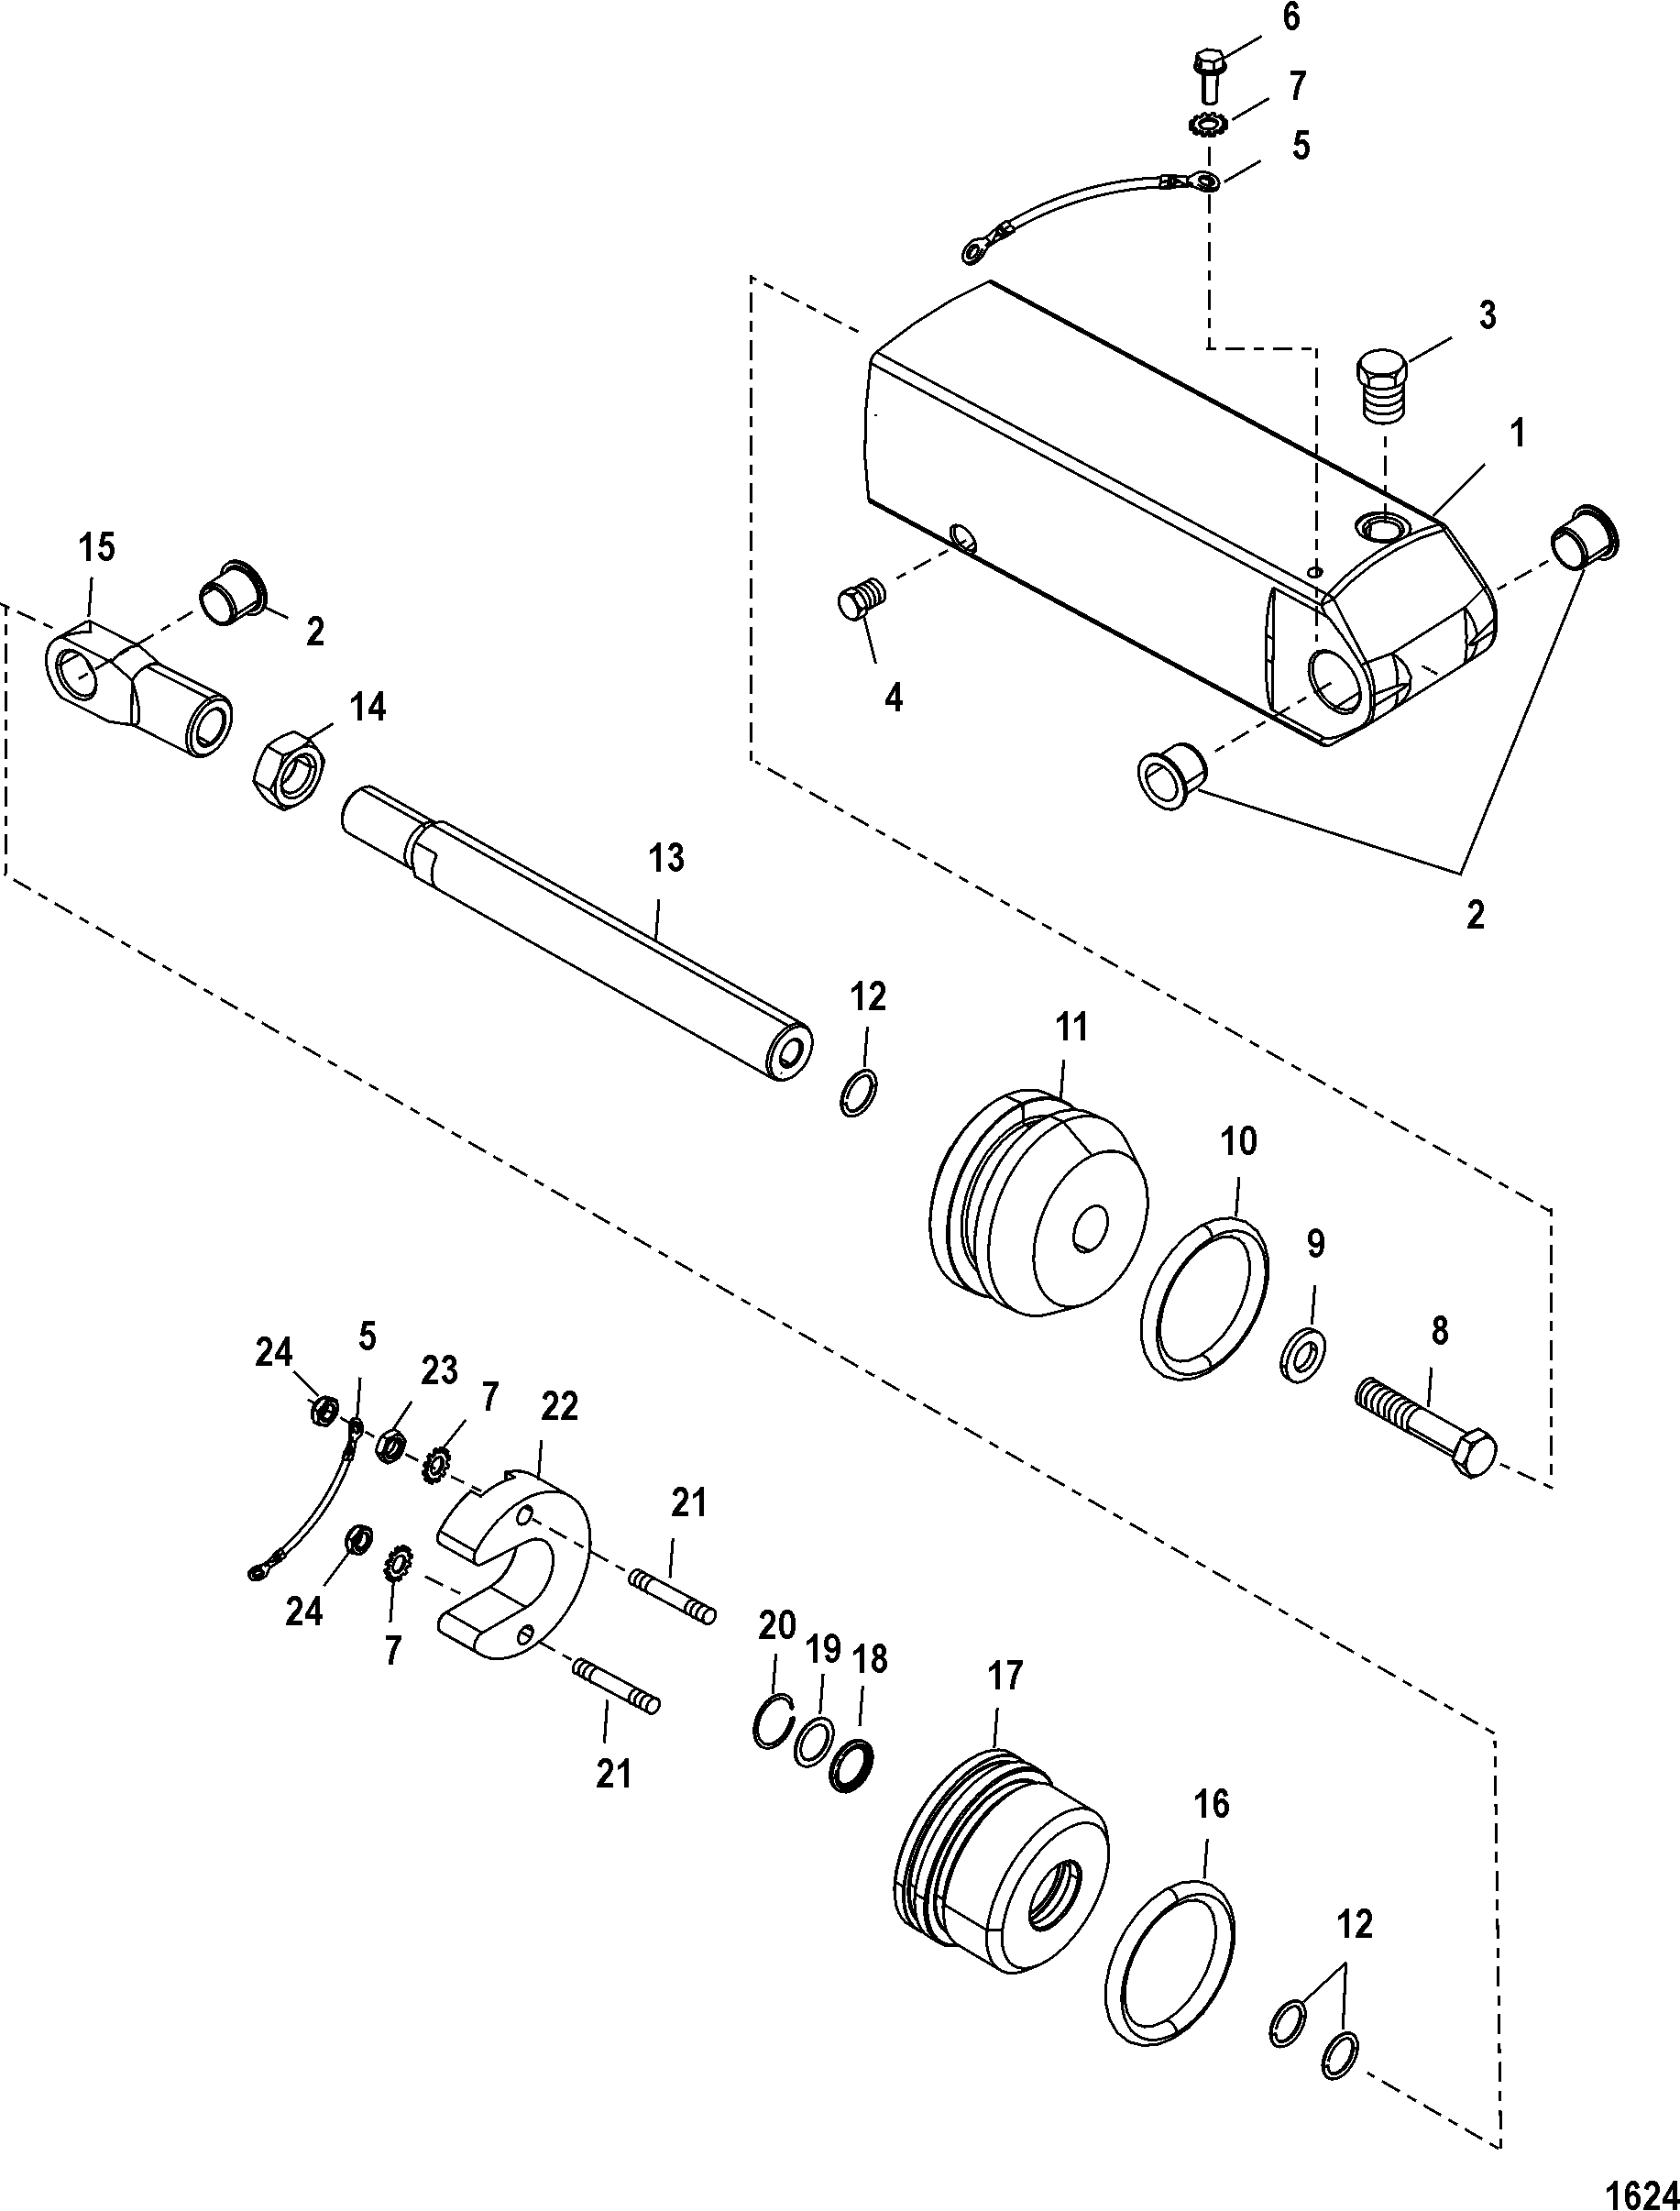 Power Steering Actuator(Integrated Transom)